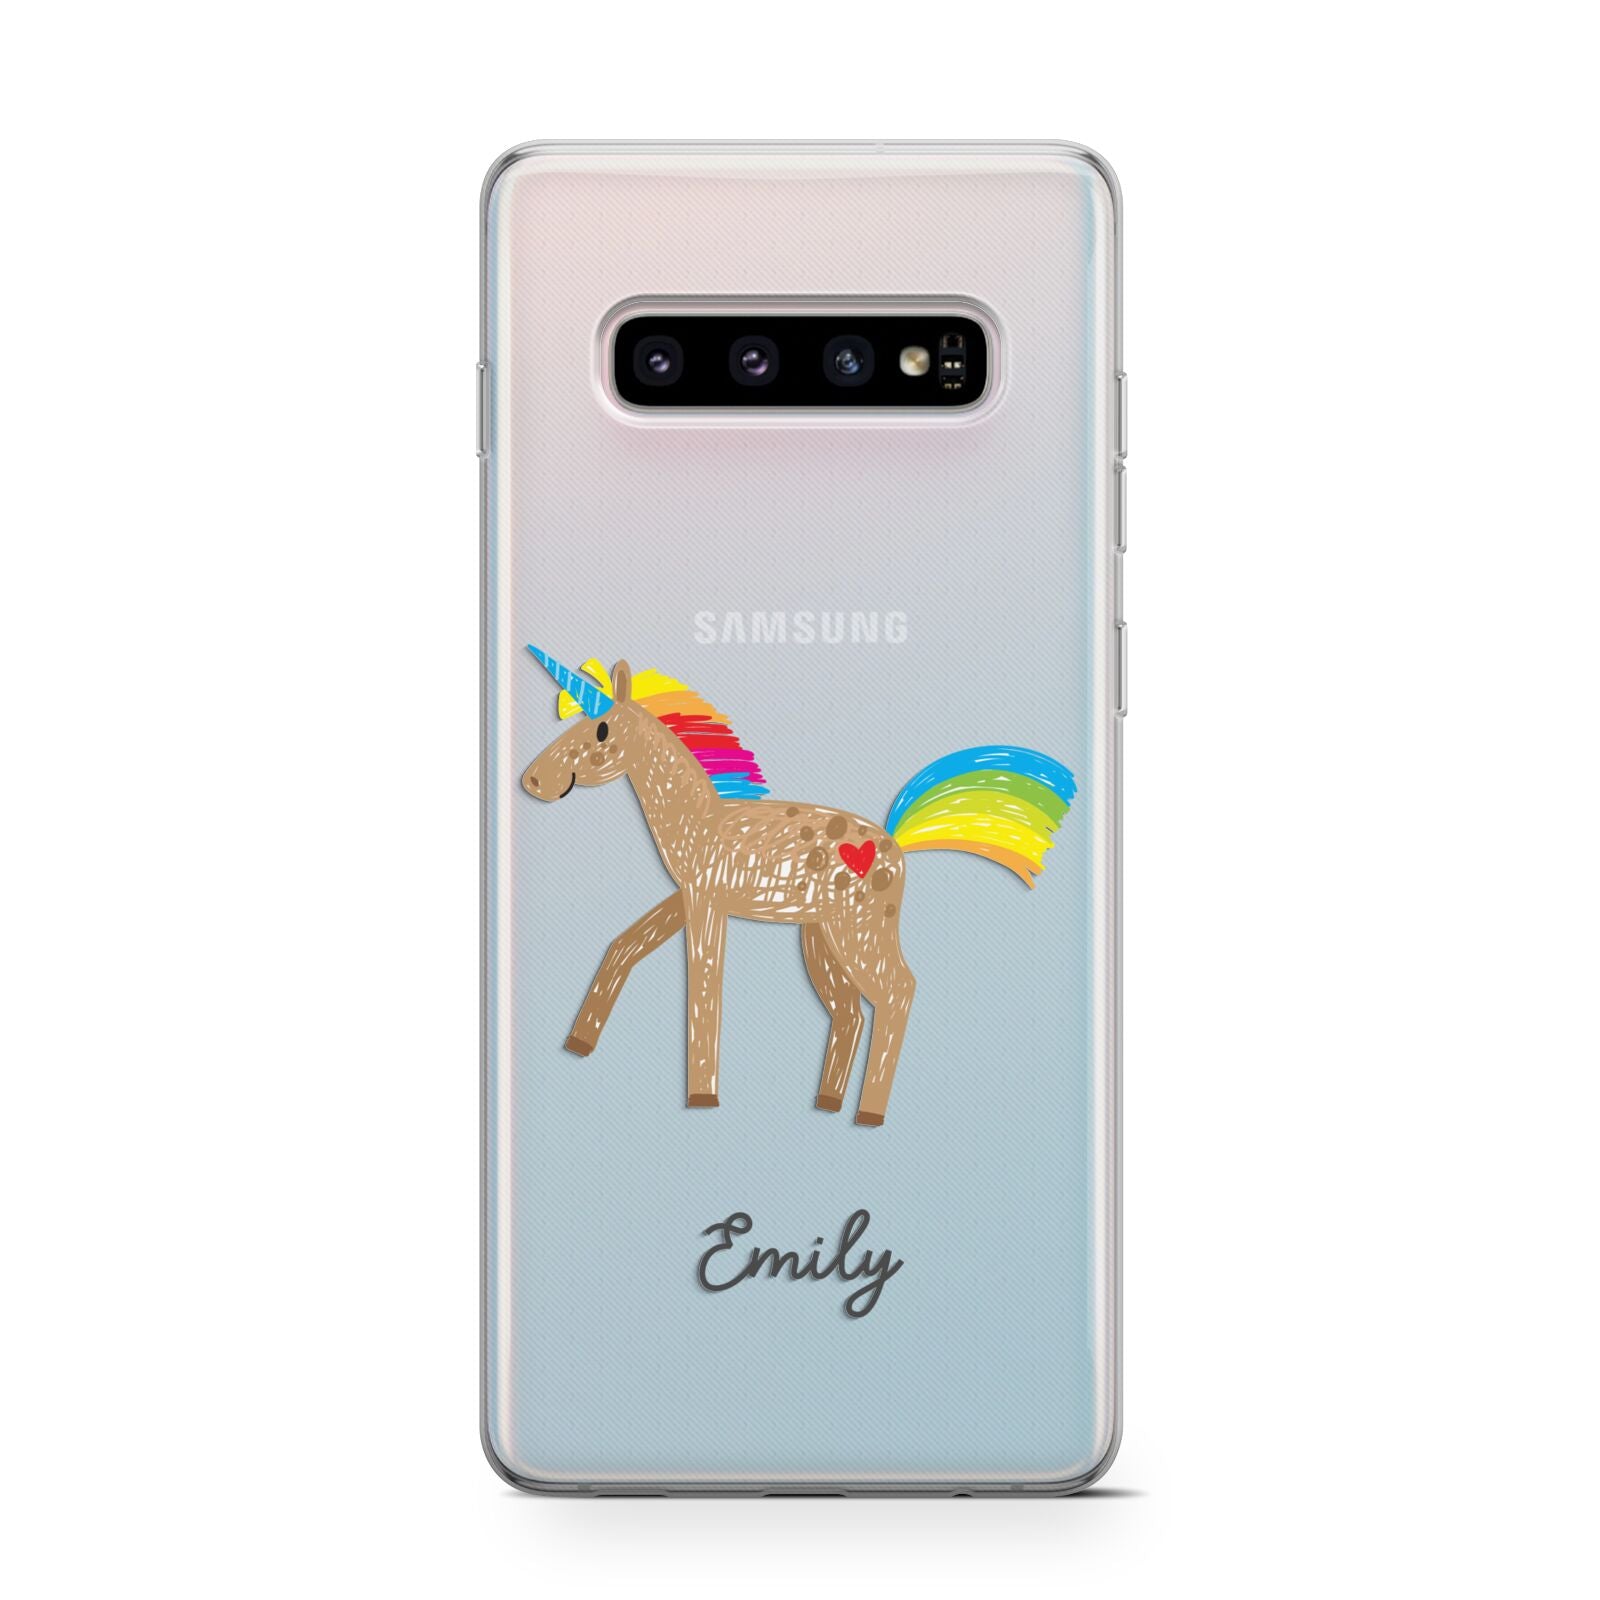 Personalised Unicorn with Name Samsung Galaxy S10 Case